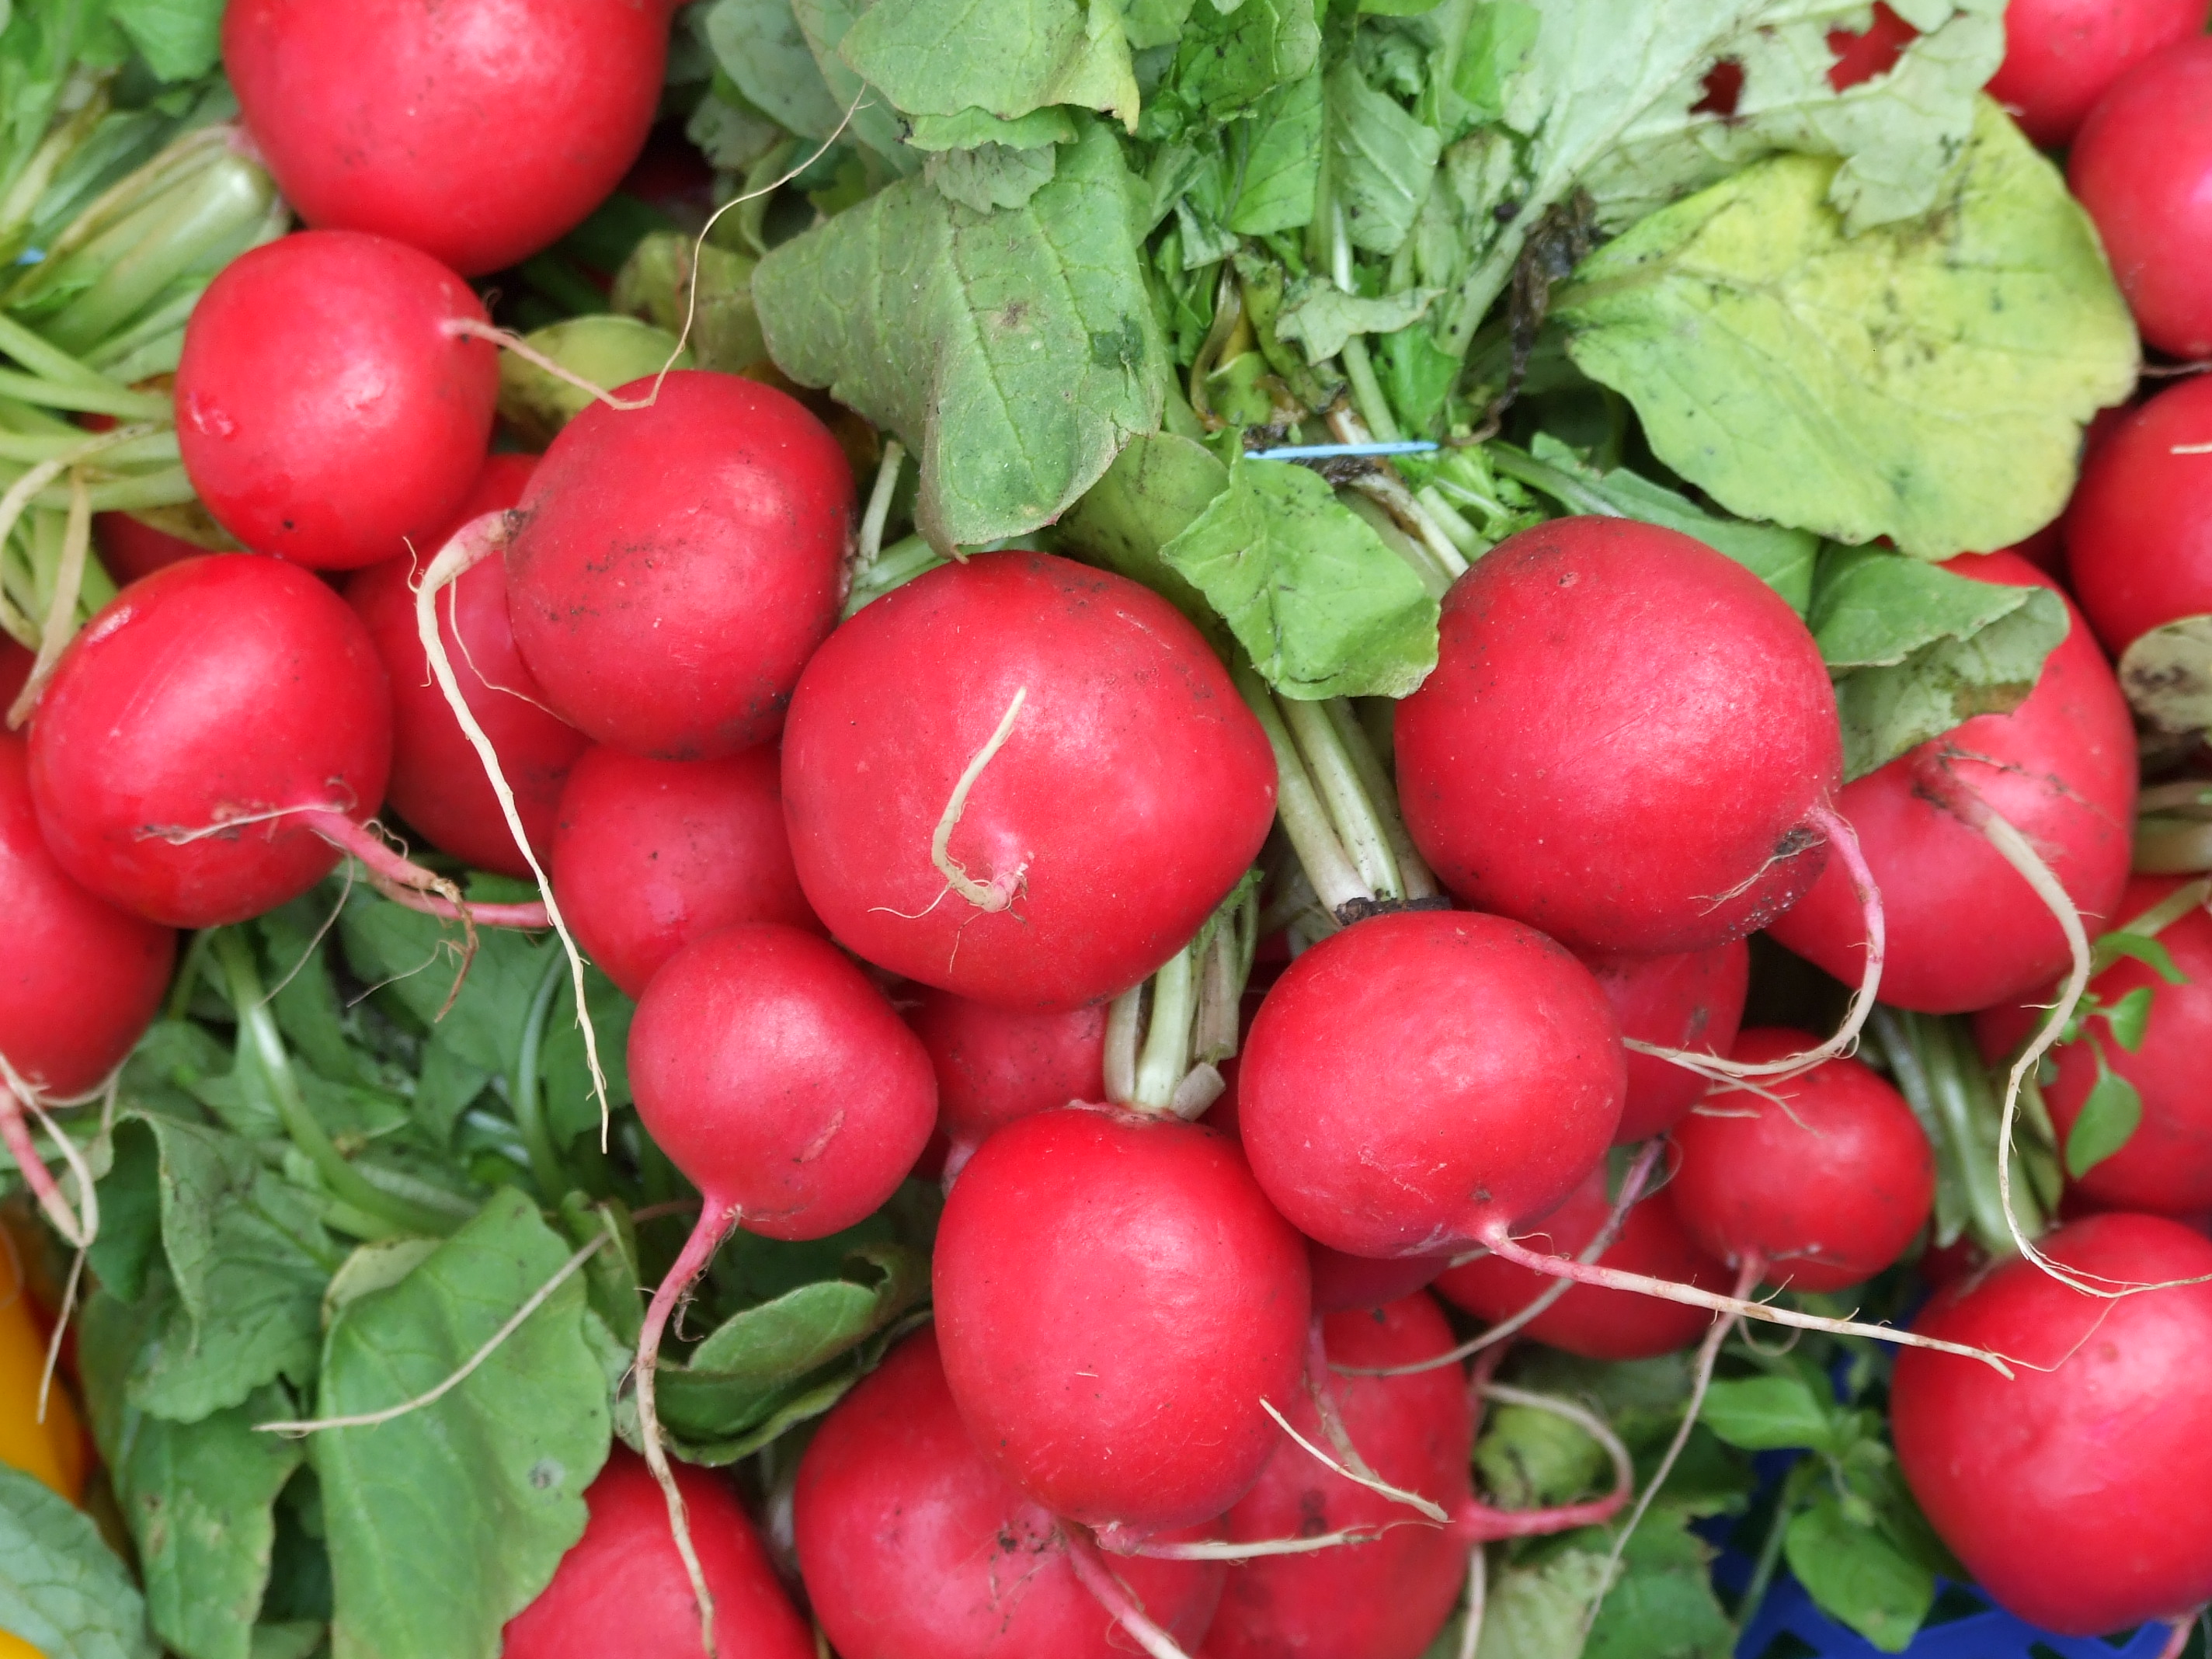 The peppery flavor of radishes make them a tasty addition to salads or relish trays. (Photo courtesy of RoganJosh, Morguefile)